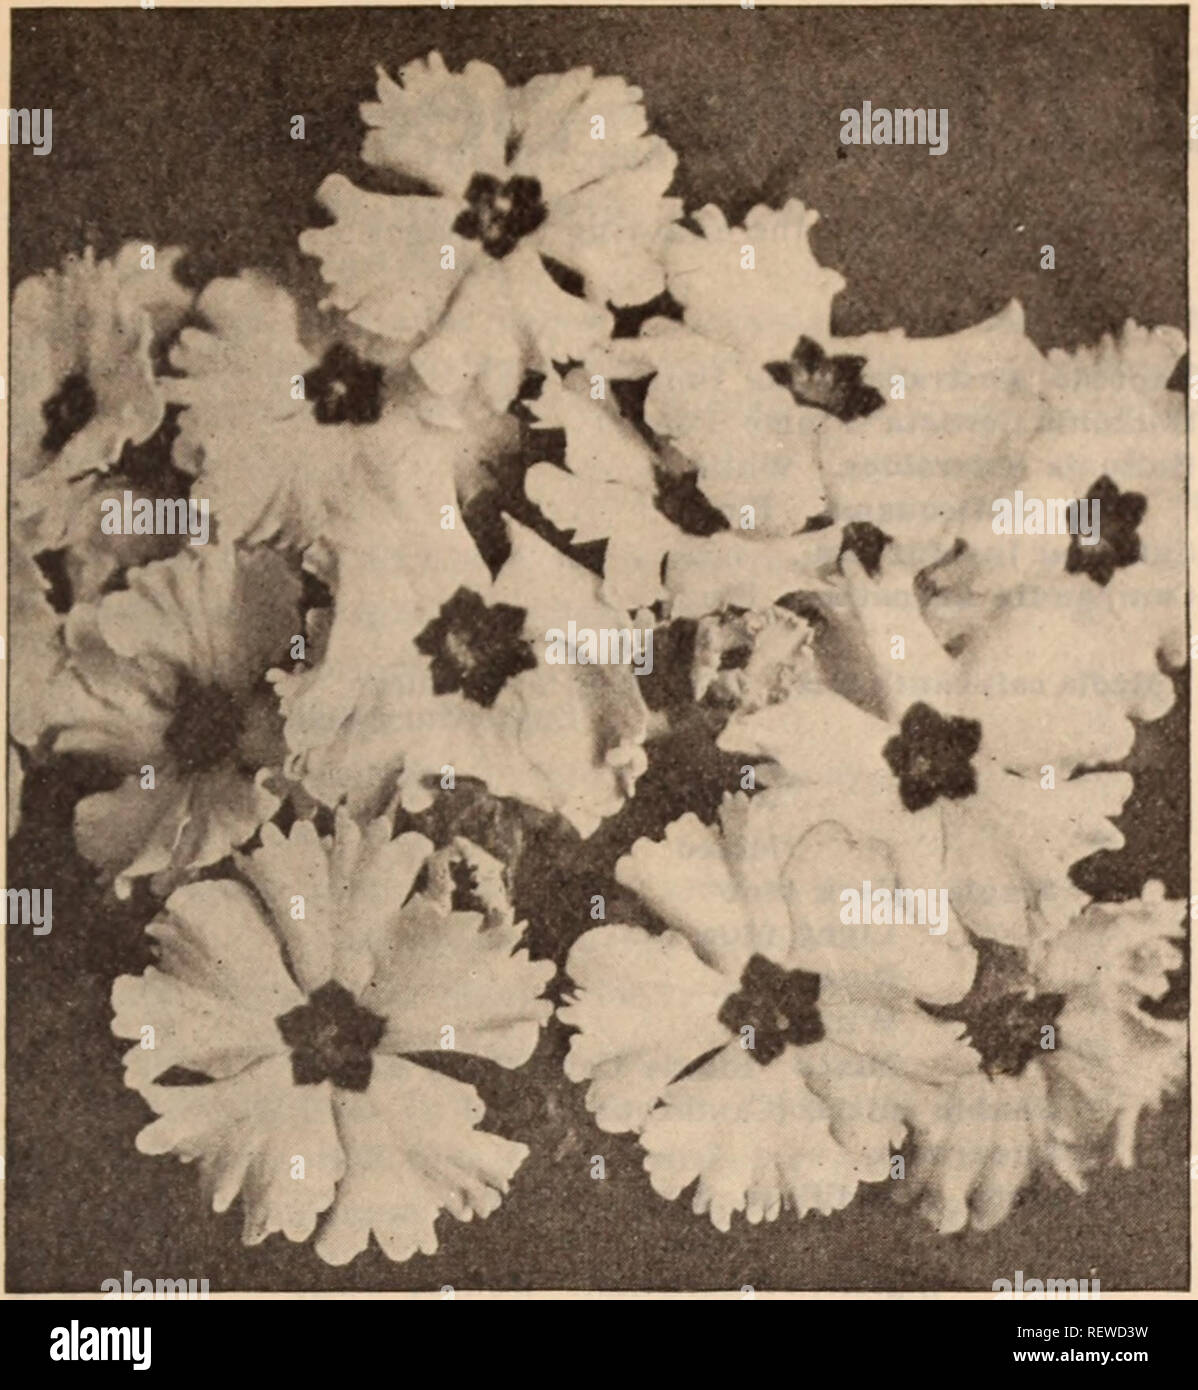 . Dreer's wholesale price list / Henry A. Dreer.. Nursery Catalogue. HENRY A. DREER, PHILADELPHIA, PA., WHOLESALE PRICE LIST 33. LARGE-FLOWERING CHINESE PRIMROSE (Offered on preceeding page) Schizanthus (Fringe Flower) j Tr. pkt. Oz. Dwarf Large Flowered. Mixed 25 $1 00 Wisetonensis. Fine for pots 40 2 00 Stocks (Gilliflower) Our stocks are grown specially for us by an expert, and will produce over 90 per cent, double flowers. Cut-and-Come-Again Ten Weeks' Stocks Splendid perpetual-blooming class; they throw out numerous side branches, all bearing very double fragrant flowers; excellent for cu Stock Photo